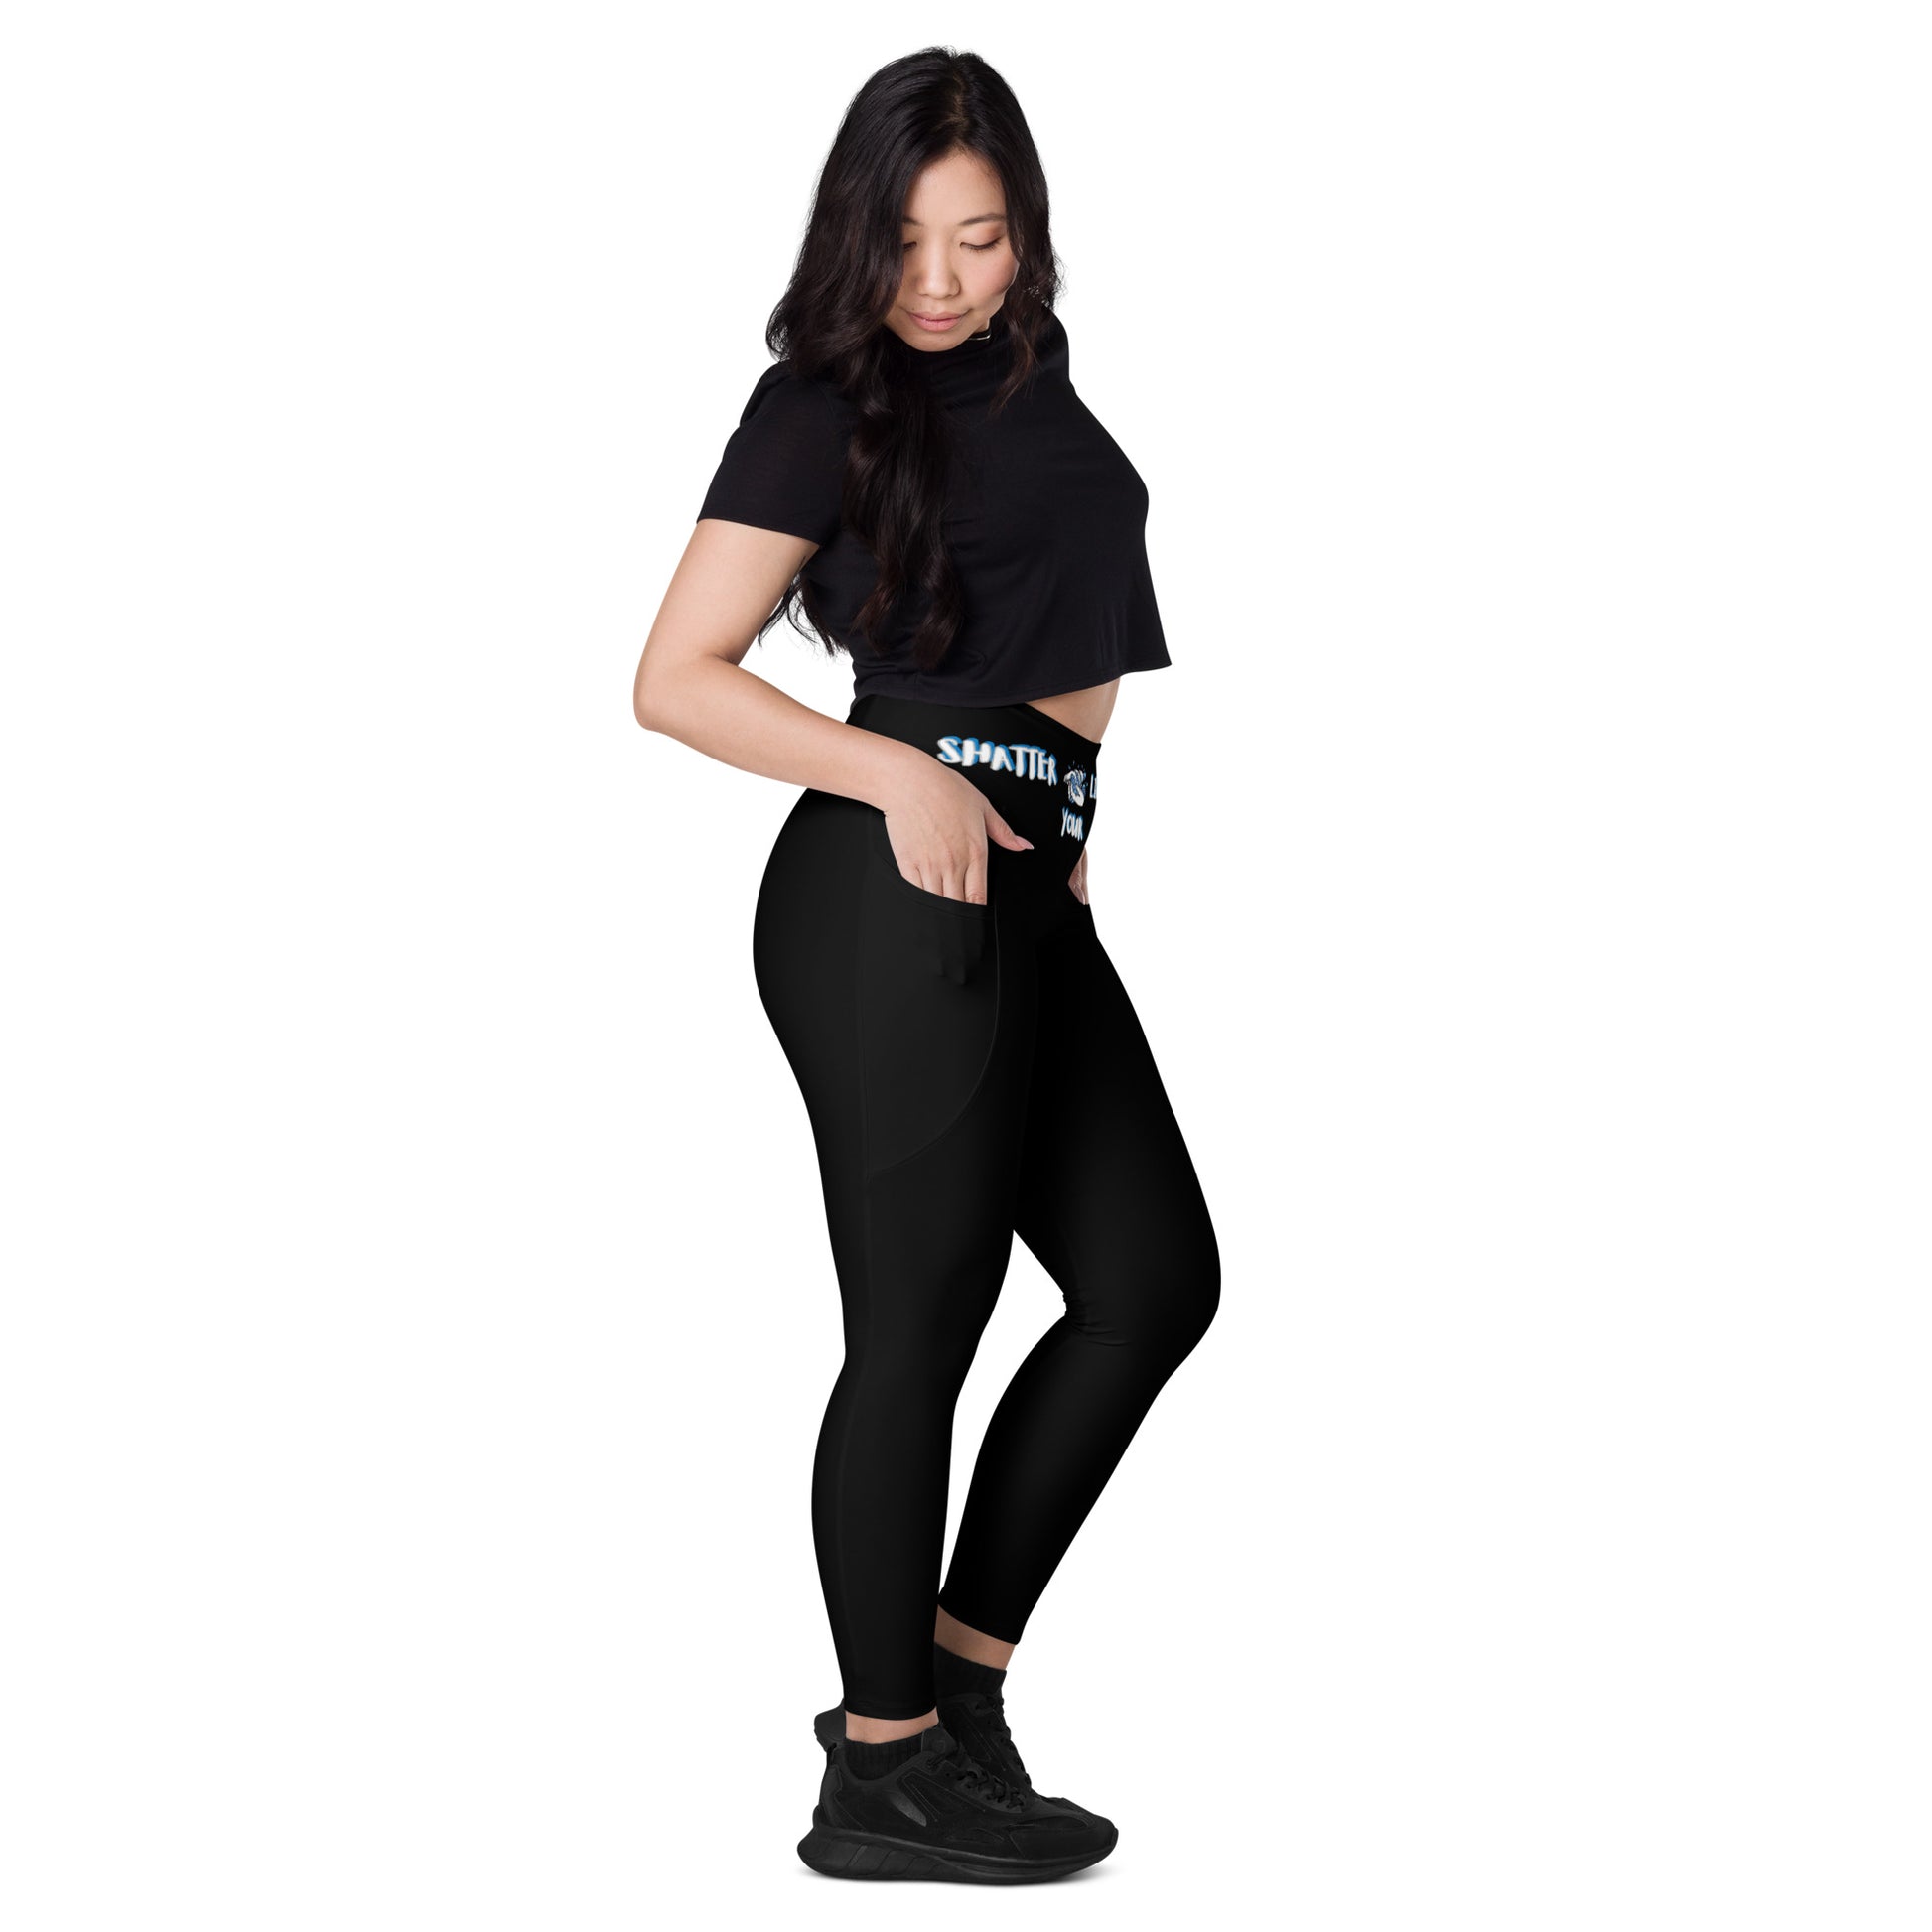 " Shatter Your Limitations" Leggings with pockets - Apply Pressure Fitness